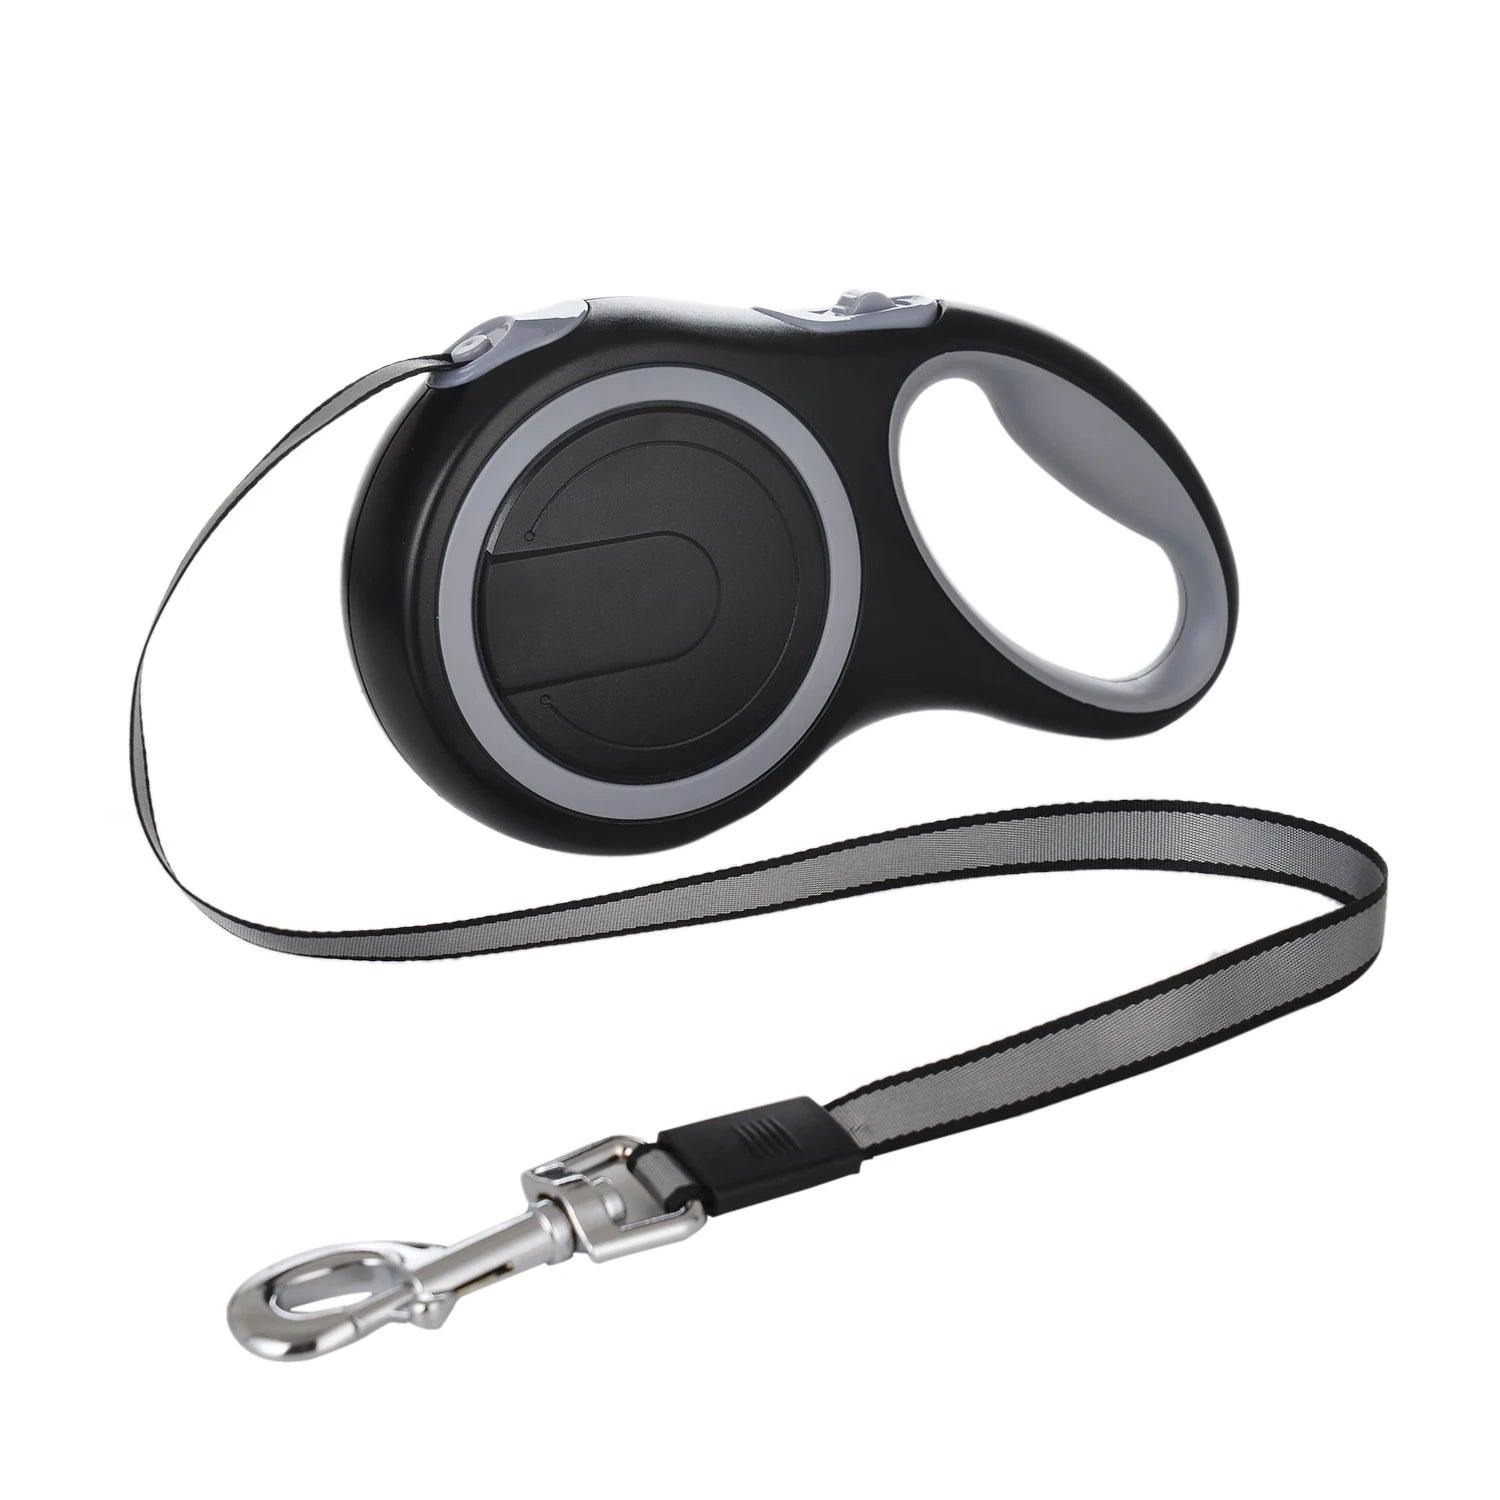 Adjustable Retractable Dog Leash for Small and Large Dogs - 3m, 5m, 8m Lengths - Up to 50kg - Durable Nylon Rope  ourlum.com   